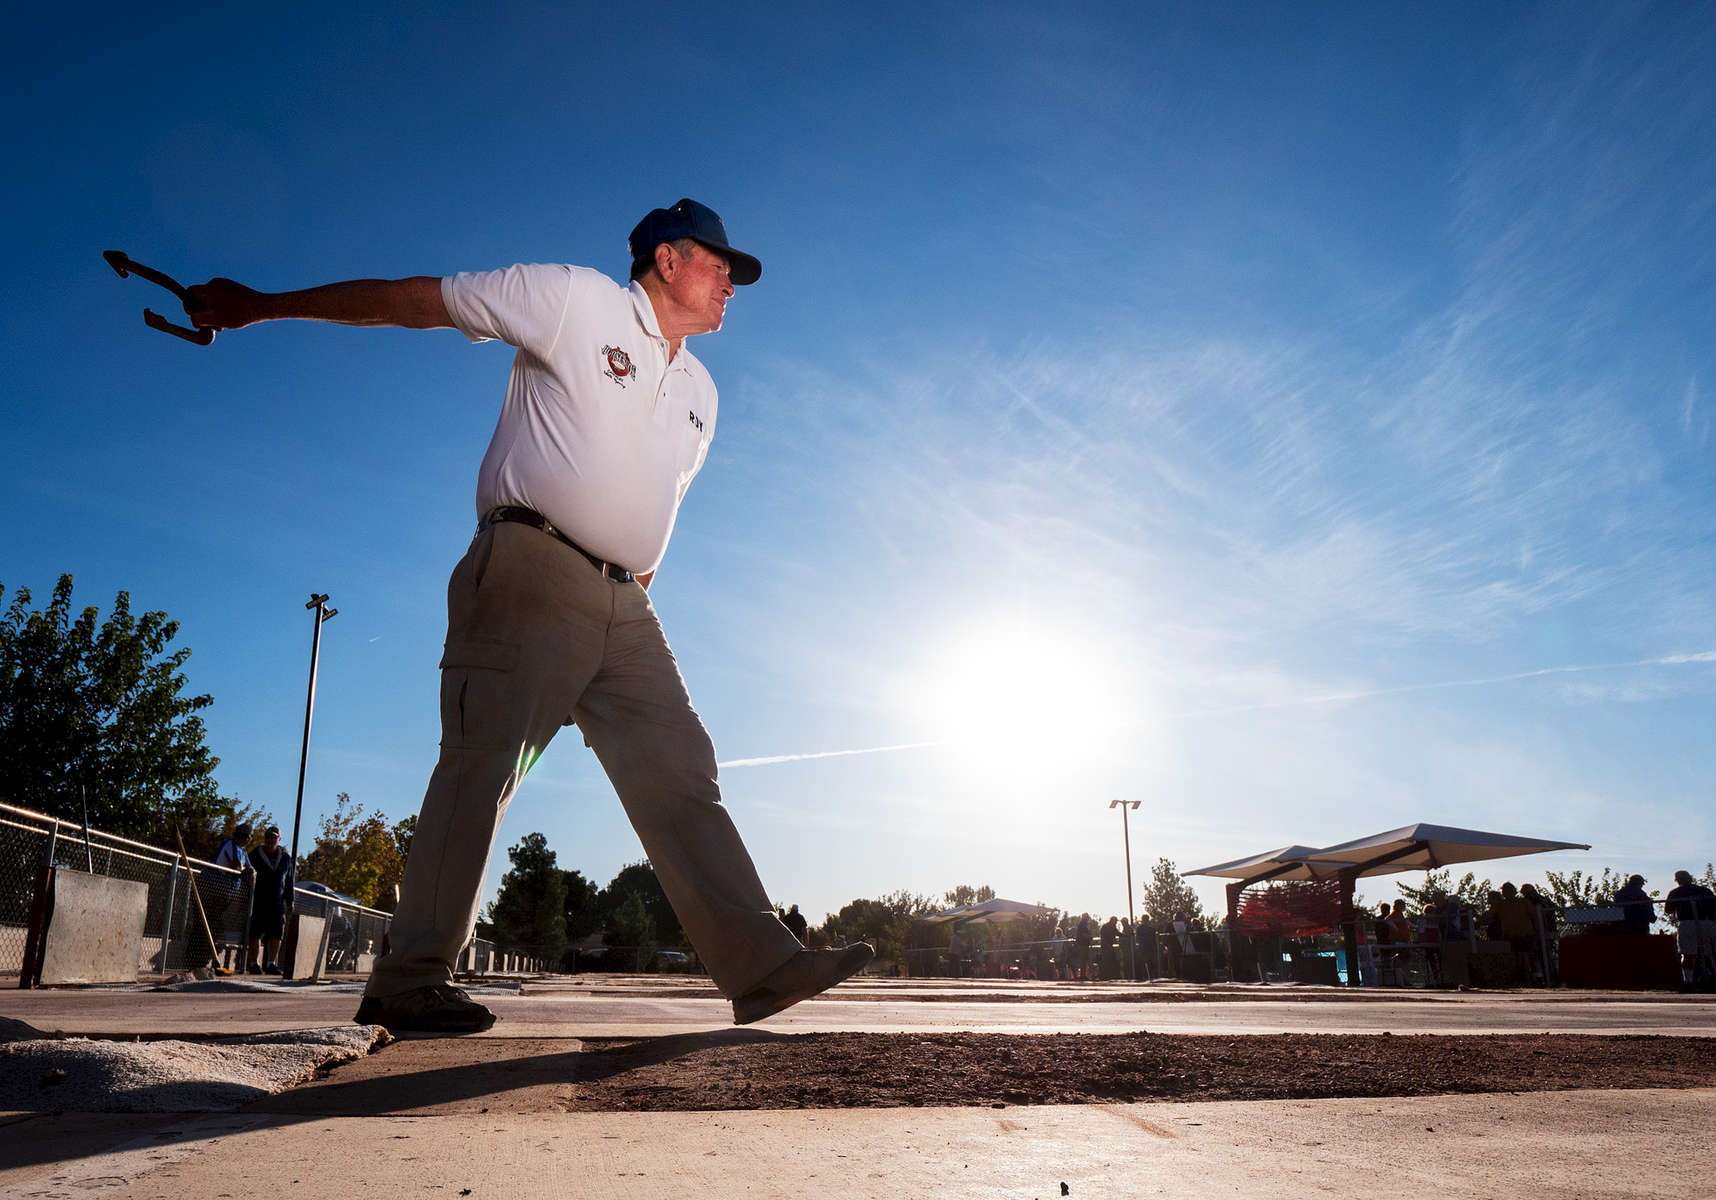 Senior athlete Roy Buhler aged seventy one throws a horse shoe before the start of the Horse shoes competition during the Huntsman World Senior Games on October 16, 2019 in St. George, Utah.